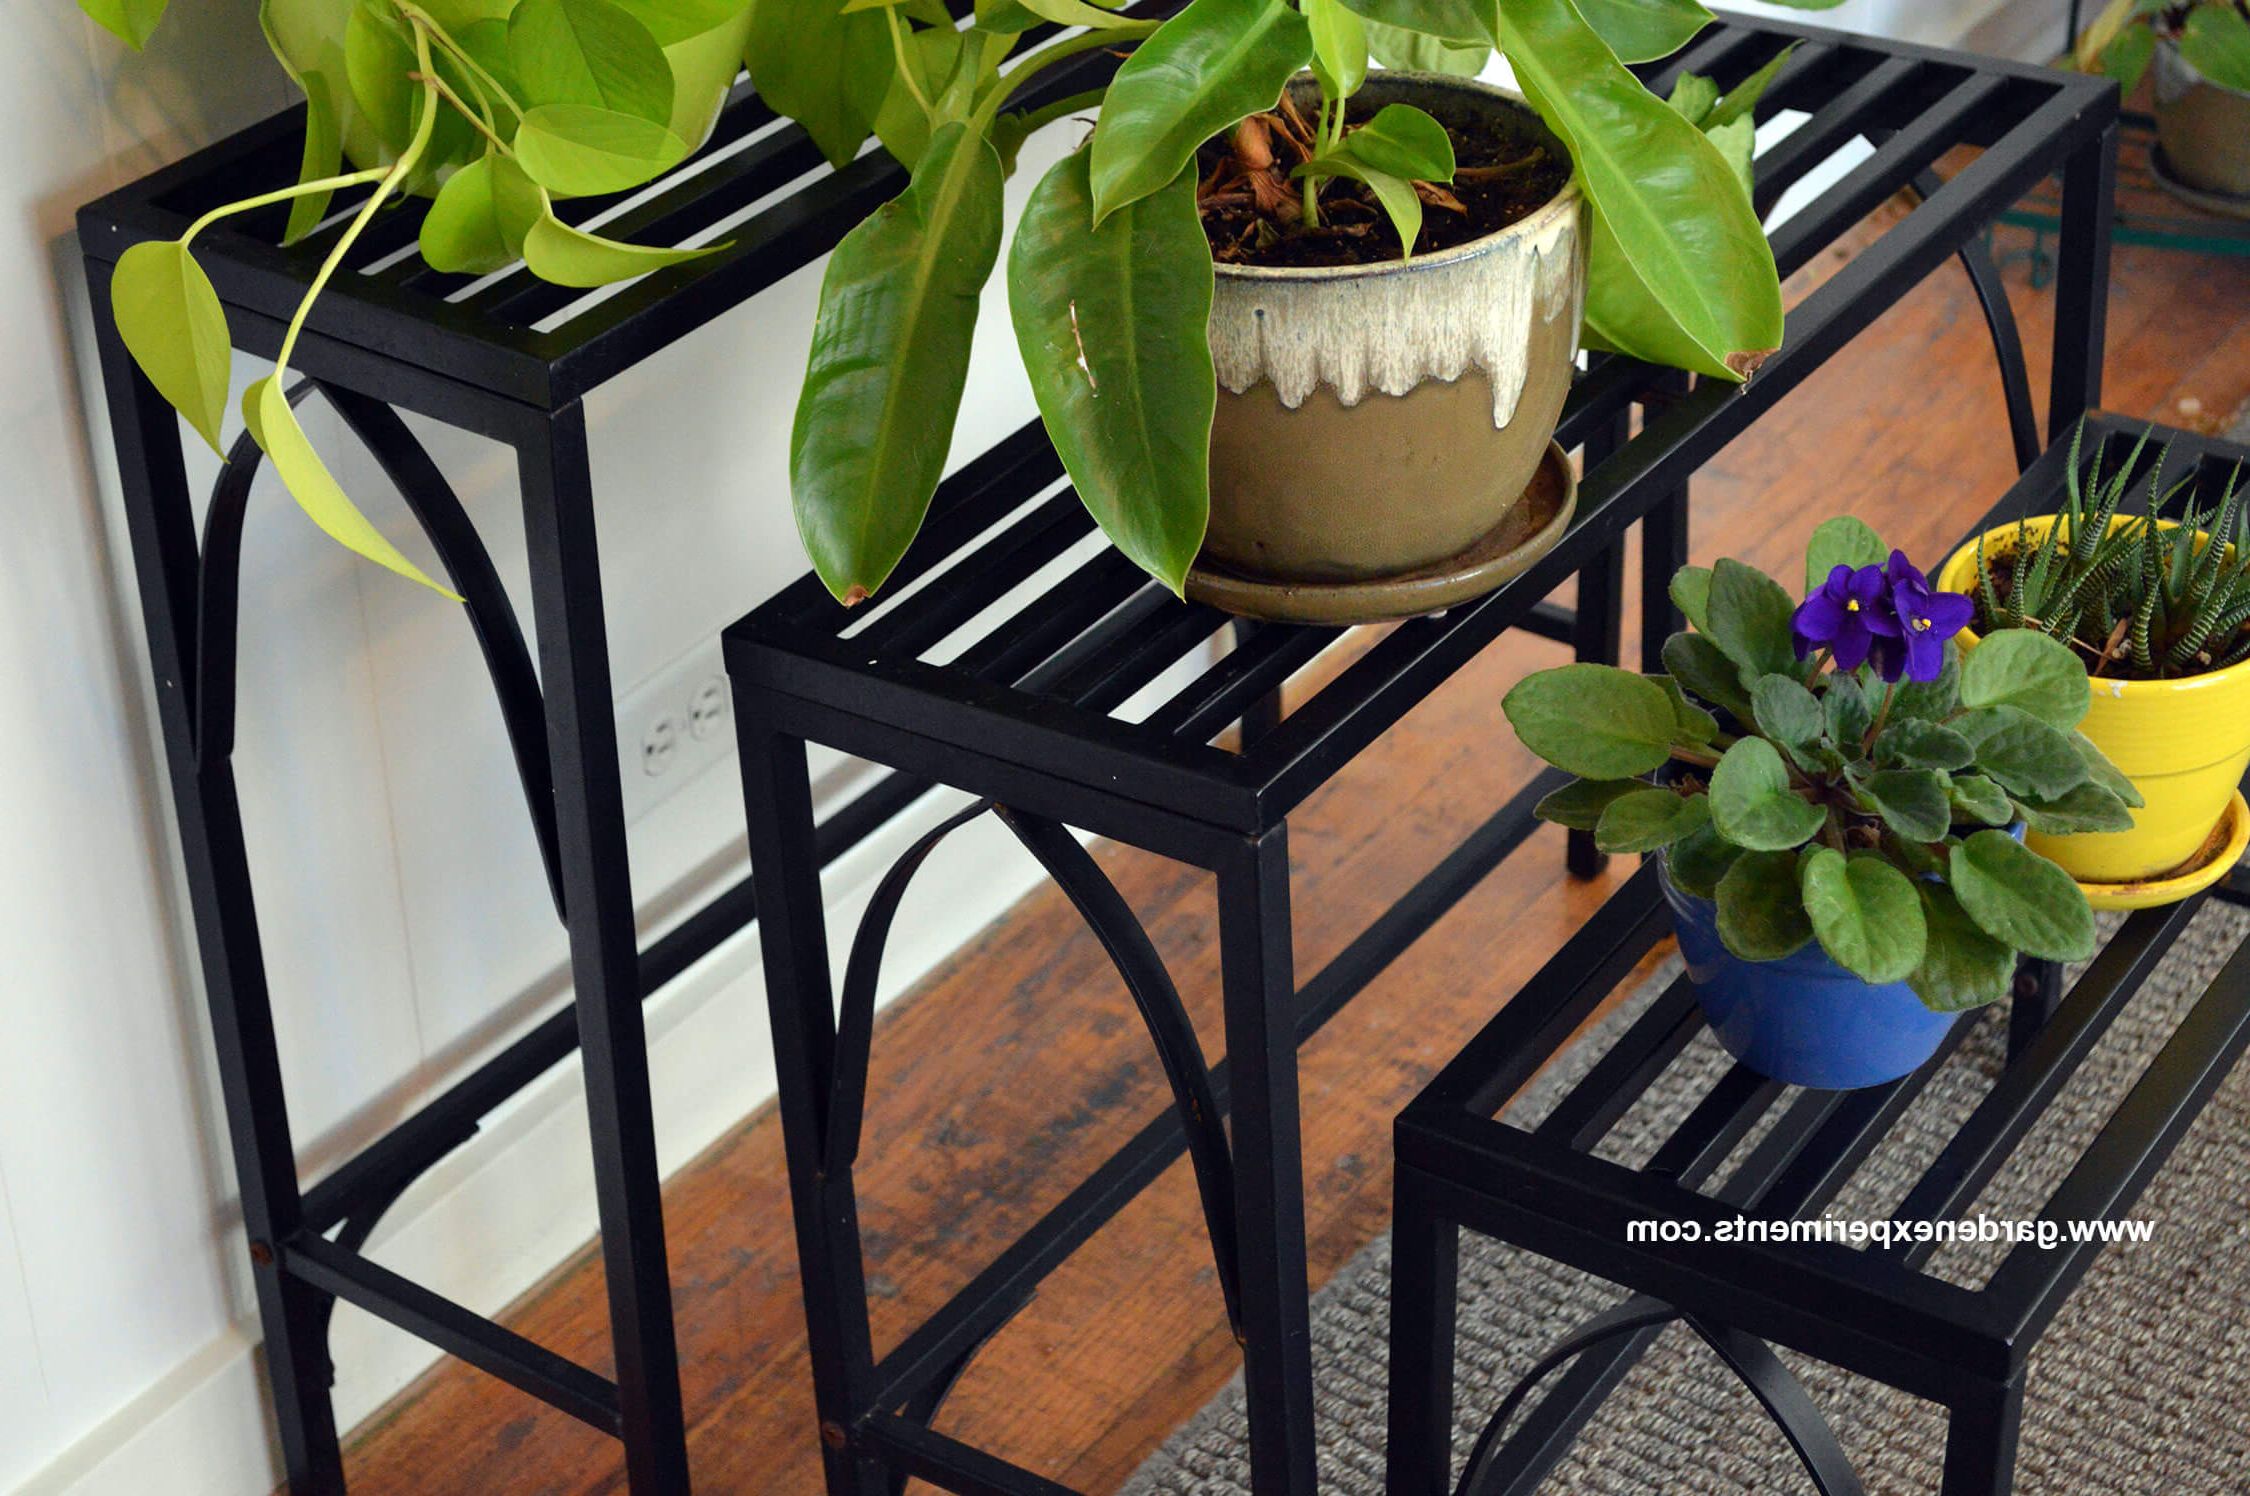 Fashionable Sturdy Metal Plant Stand Holds 12 Plants Regarding Metal Plant Stands (View 5 of 15)